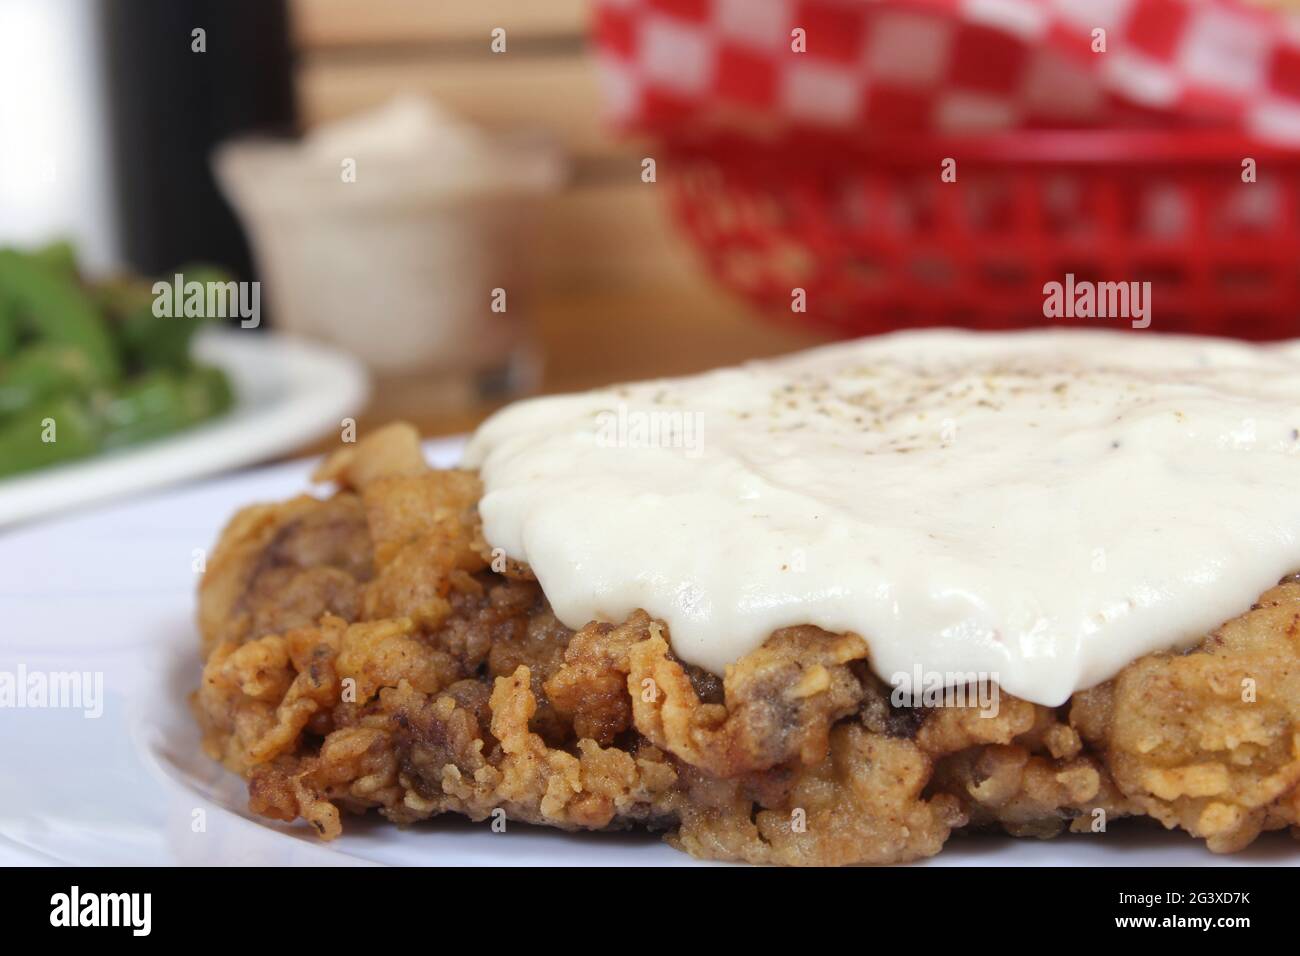 Chicken Fried Steak and Gravy With Mashed Potatoes in Rural Cafe Stock Photo